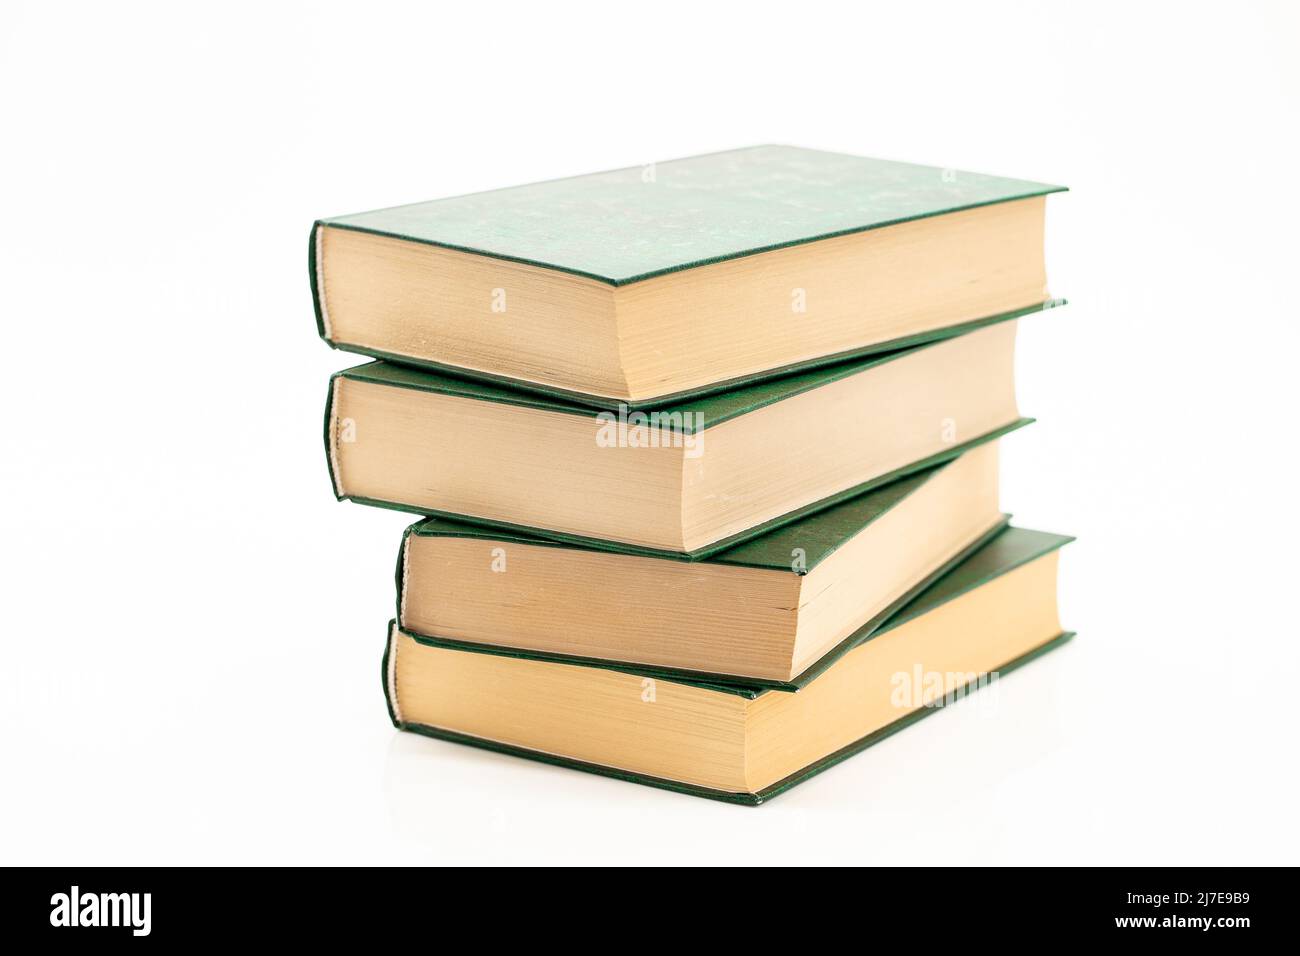 Reading and education. Books stack with green covers on a white background.Reading of books. Knowledge concept. Stock Photo